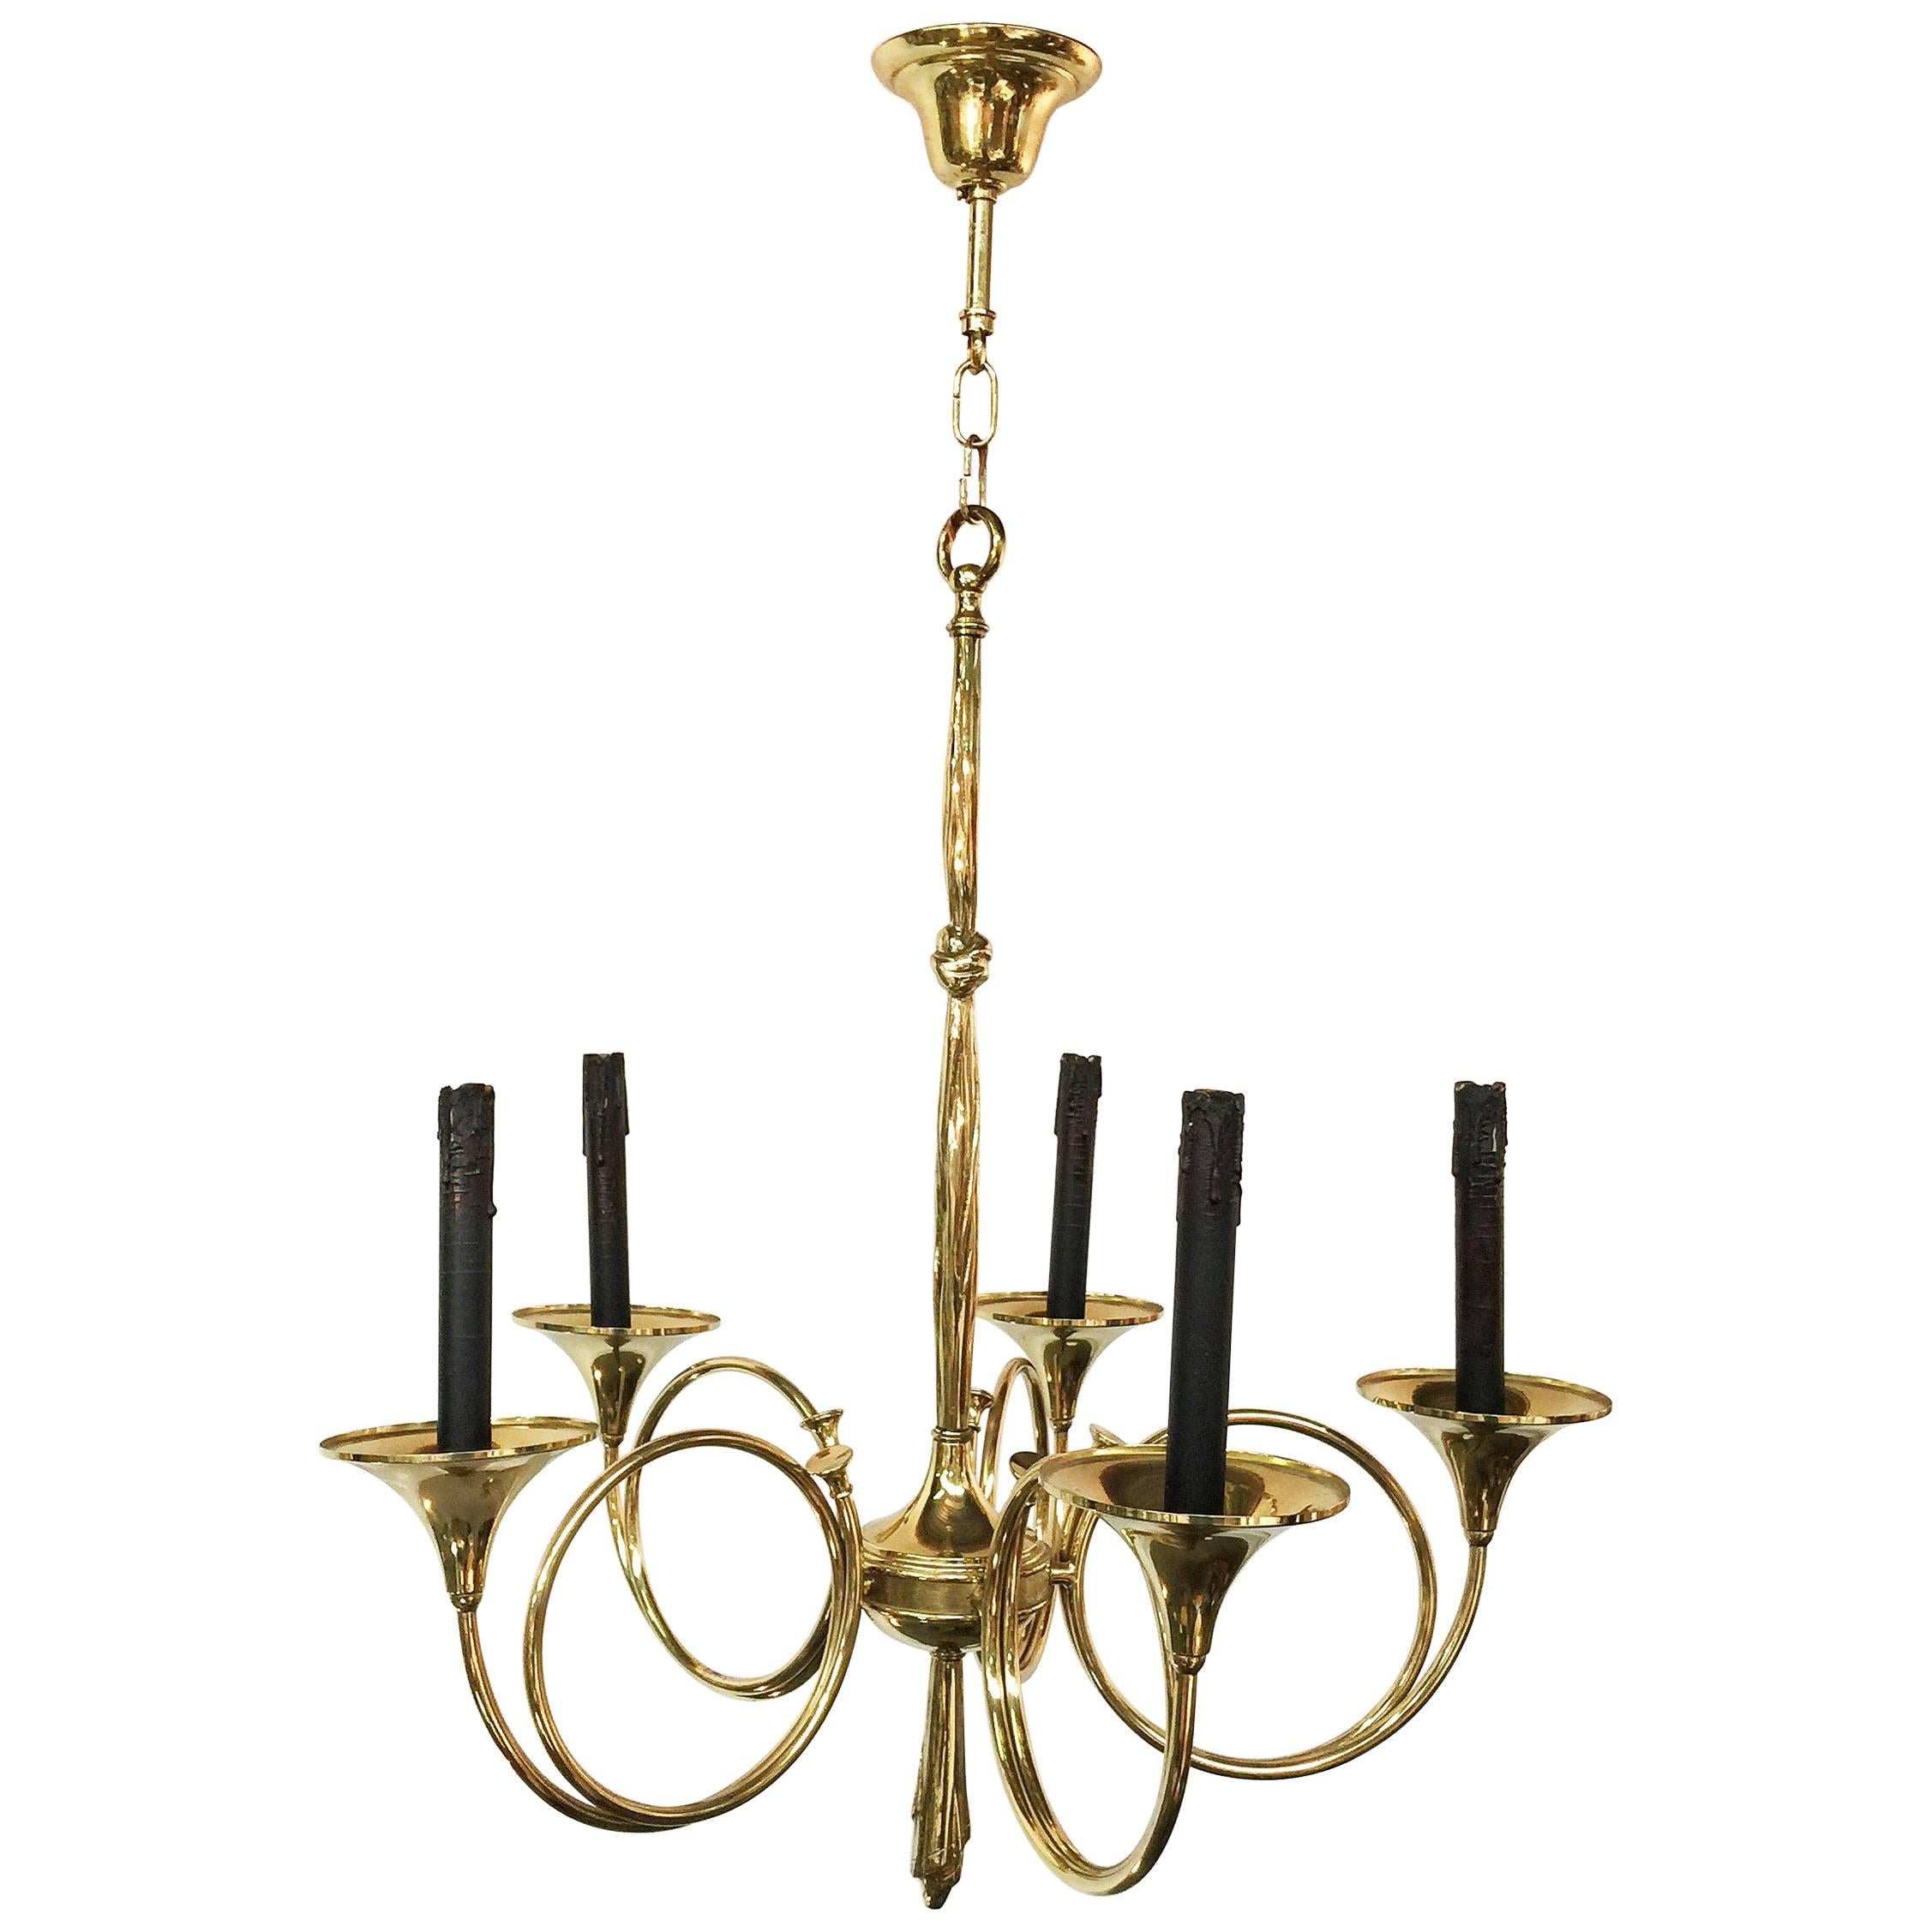 1950 Brass Chandelier with Hunt Design in the Style of Maison Jansen